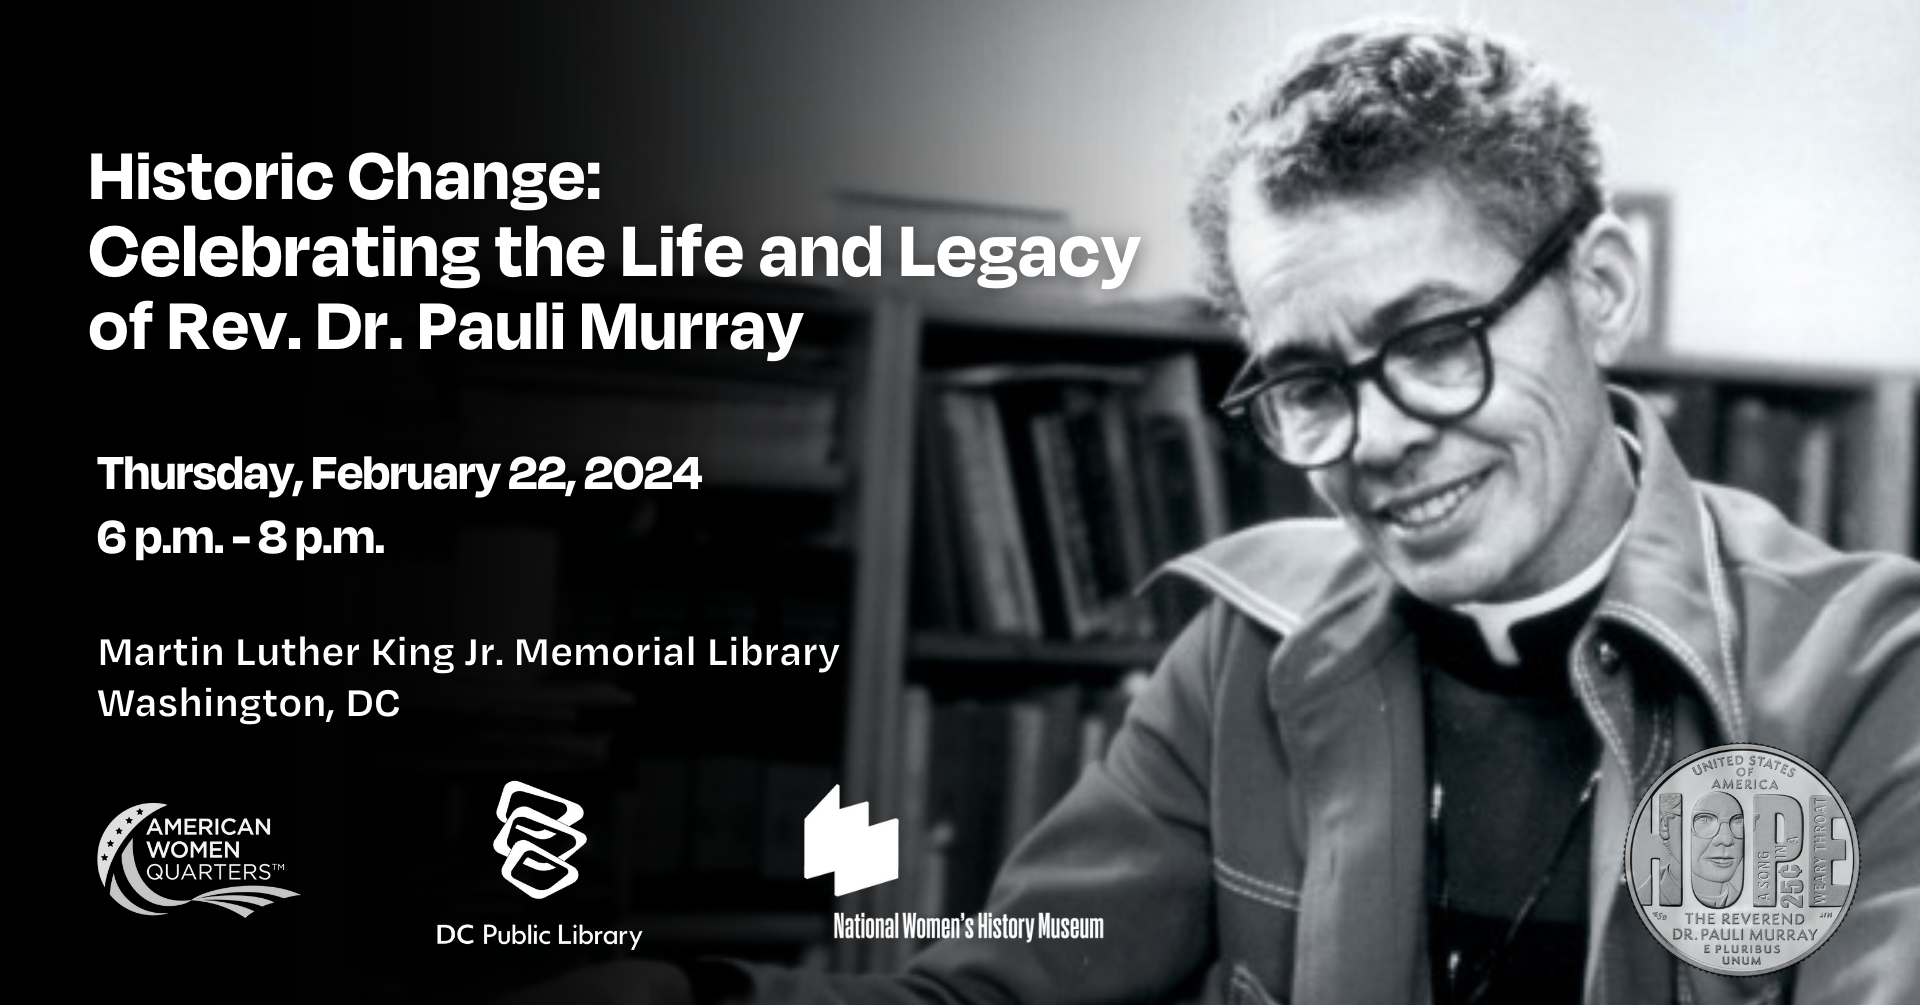 Image of Pauli Murray seated in black and white, with another image of the front of the Pauli Murray coin. Includes text of event title and details.